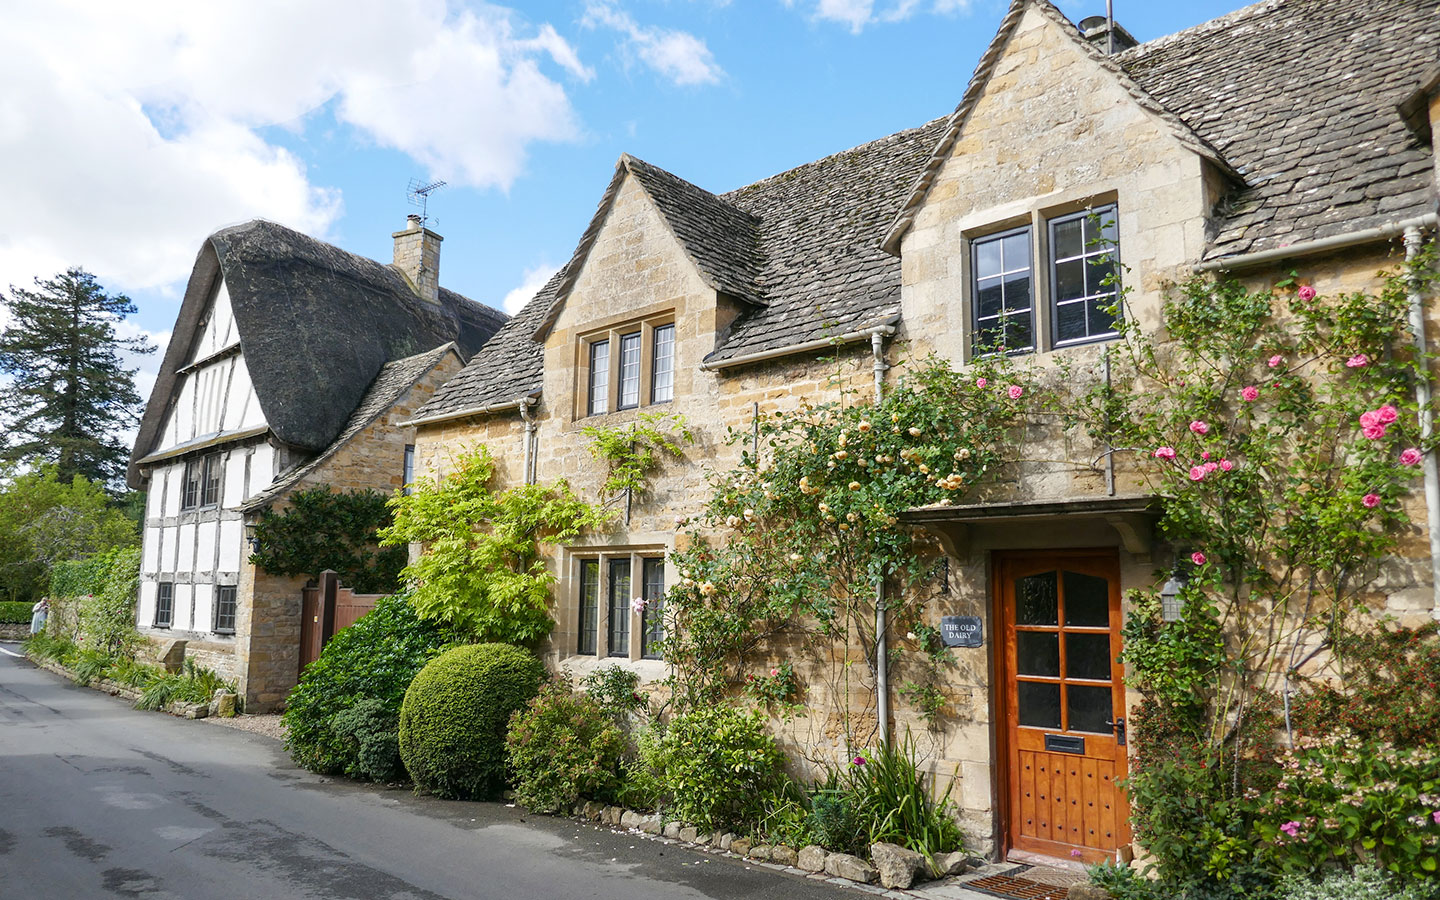 How to plan a day trip from London to Cotswolds (with or without a car)